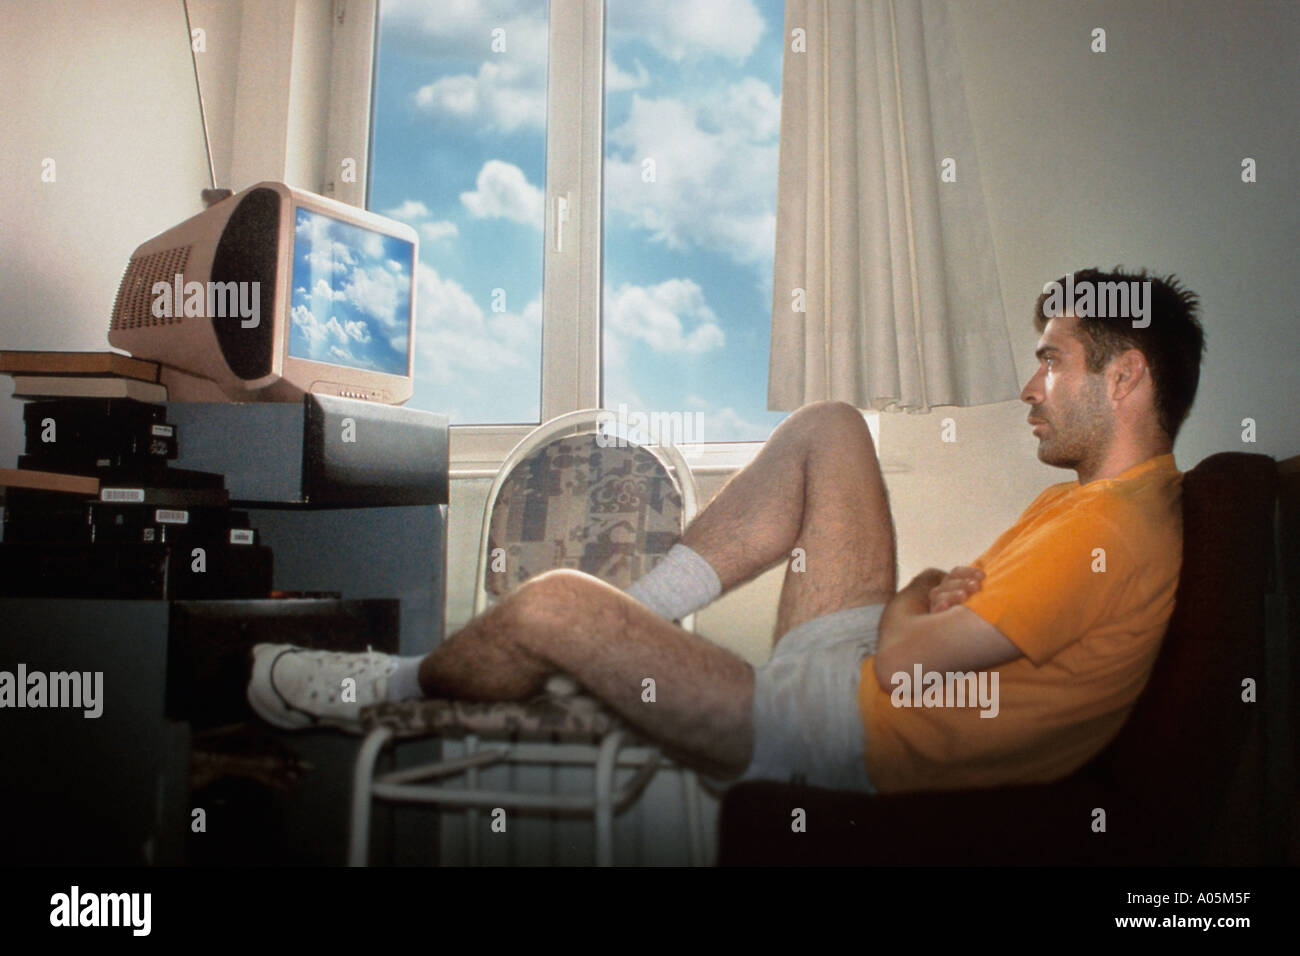 Man watching tv by himself with the window open and the clouds reflecting on the screen Stock Photo